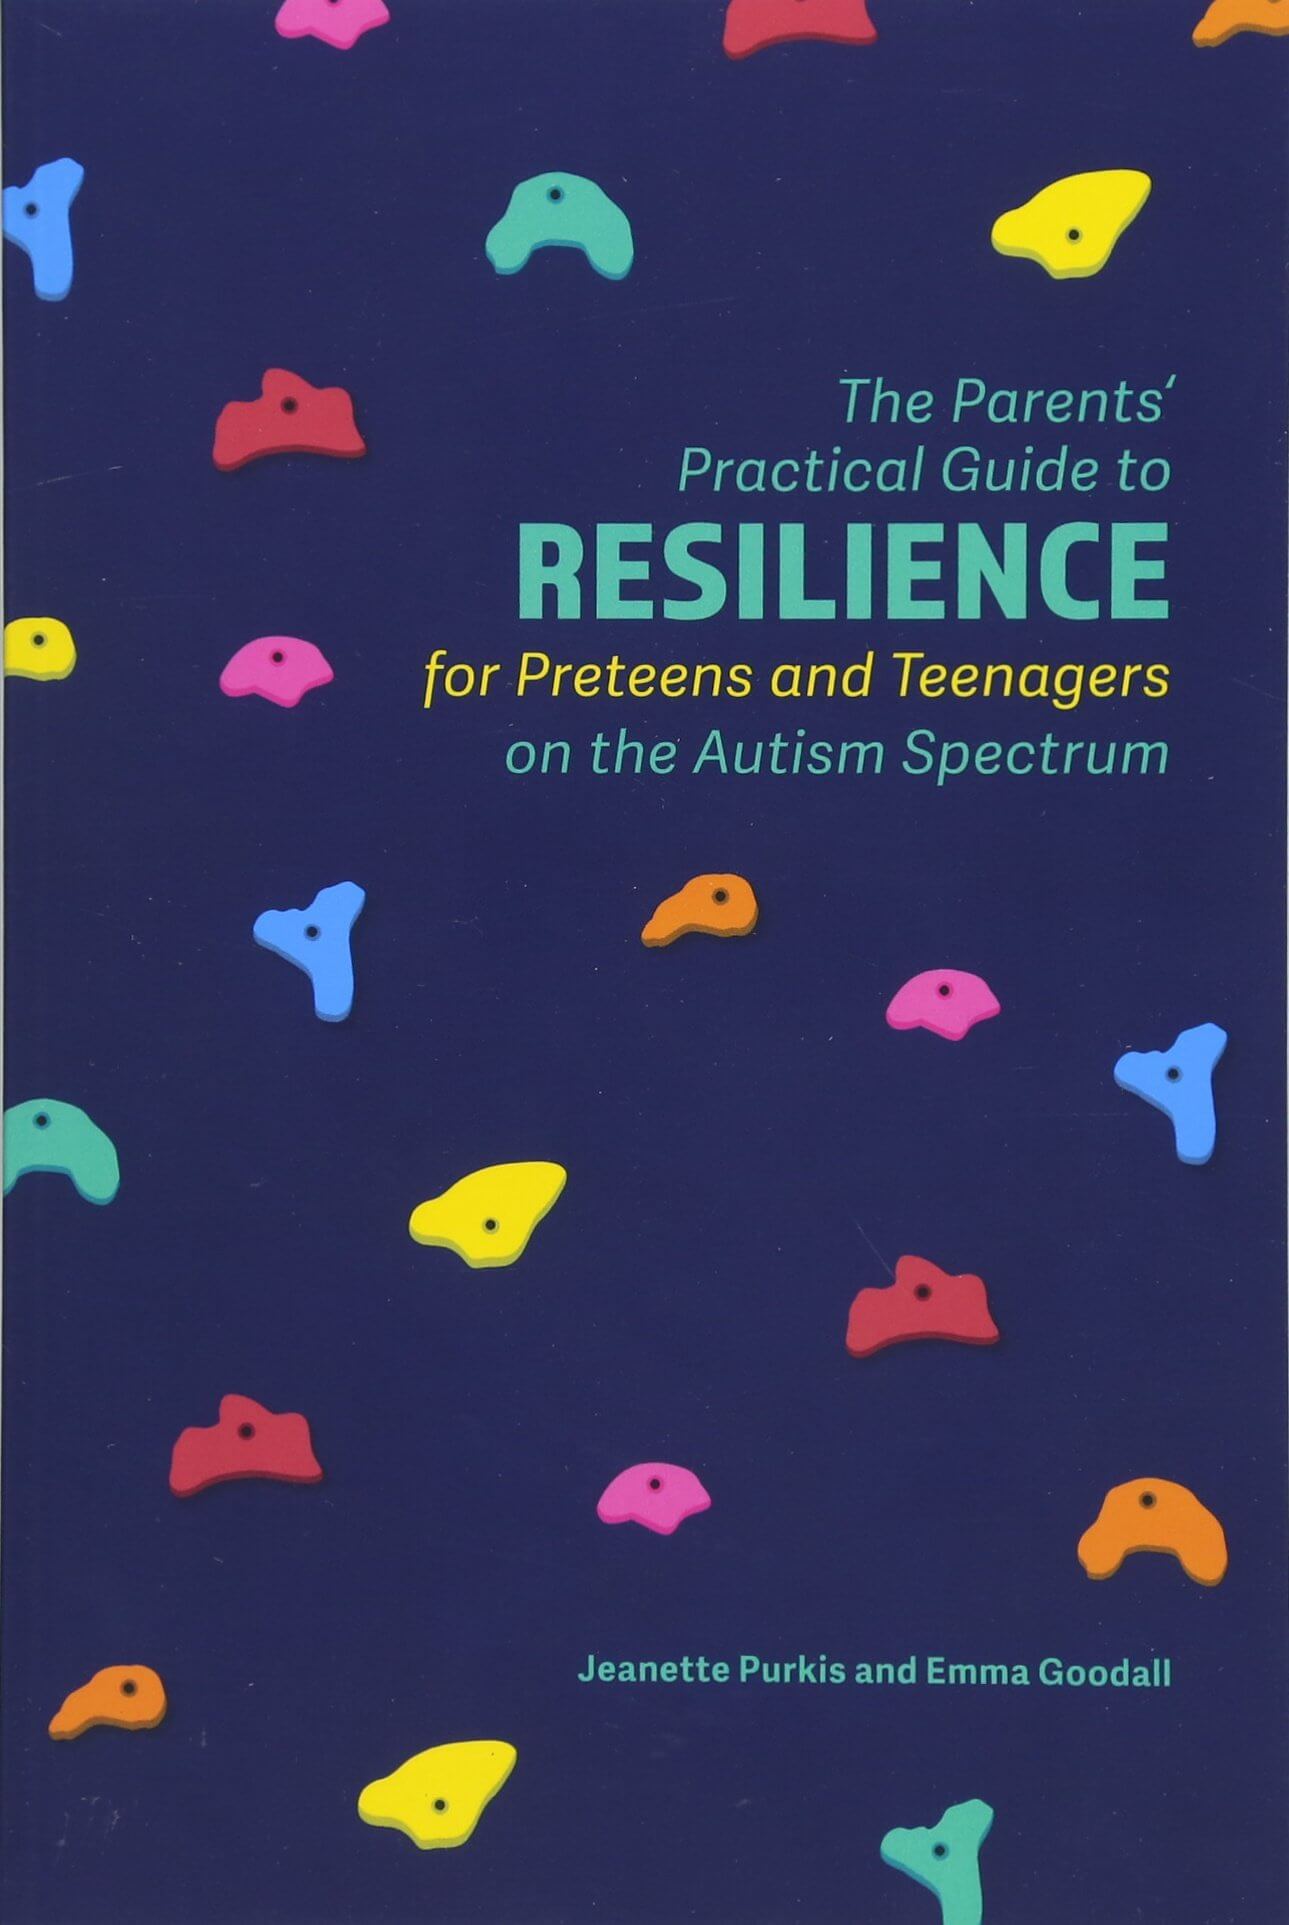 The Parents’ Practical Guide to Resilience for Preteens and Teenagers on the Autism Spectrum